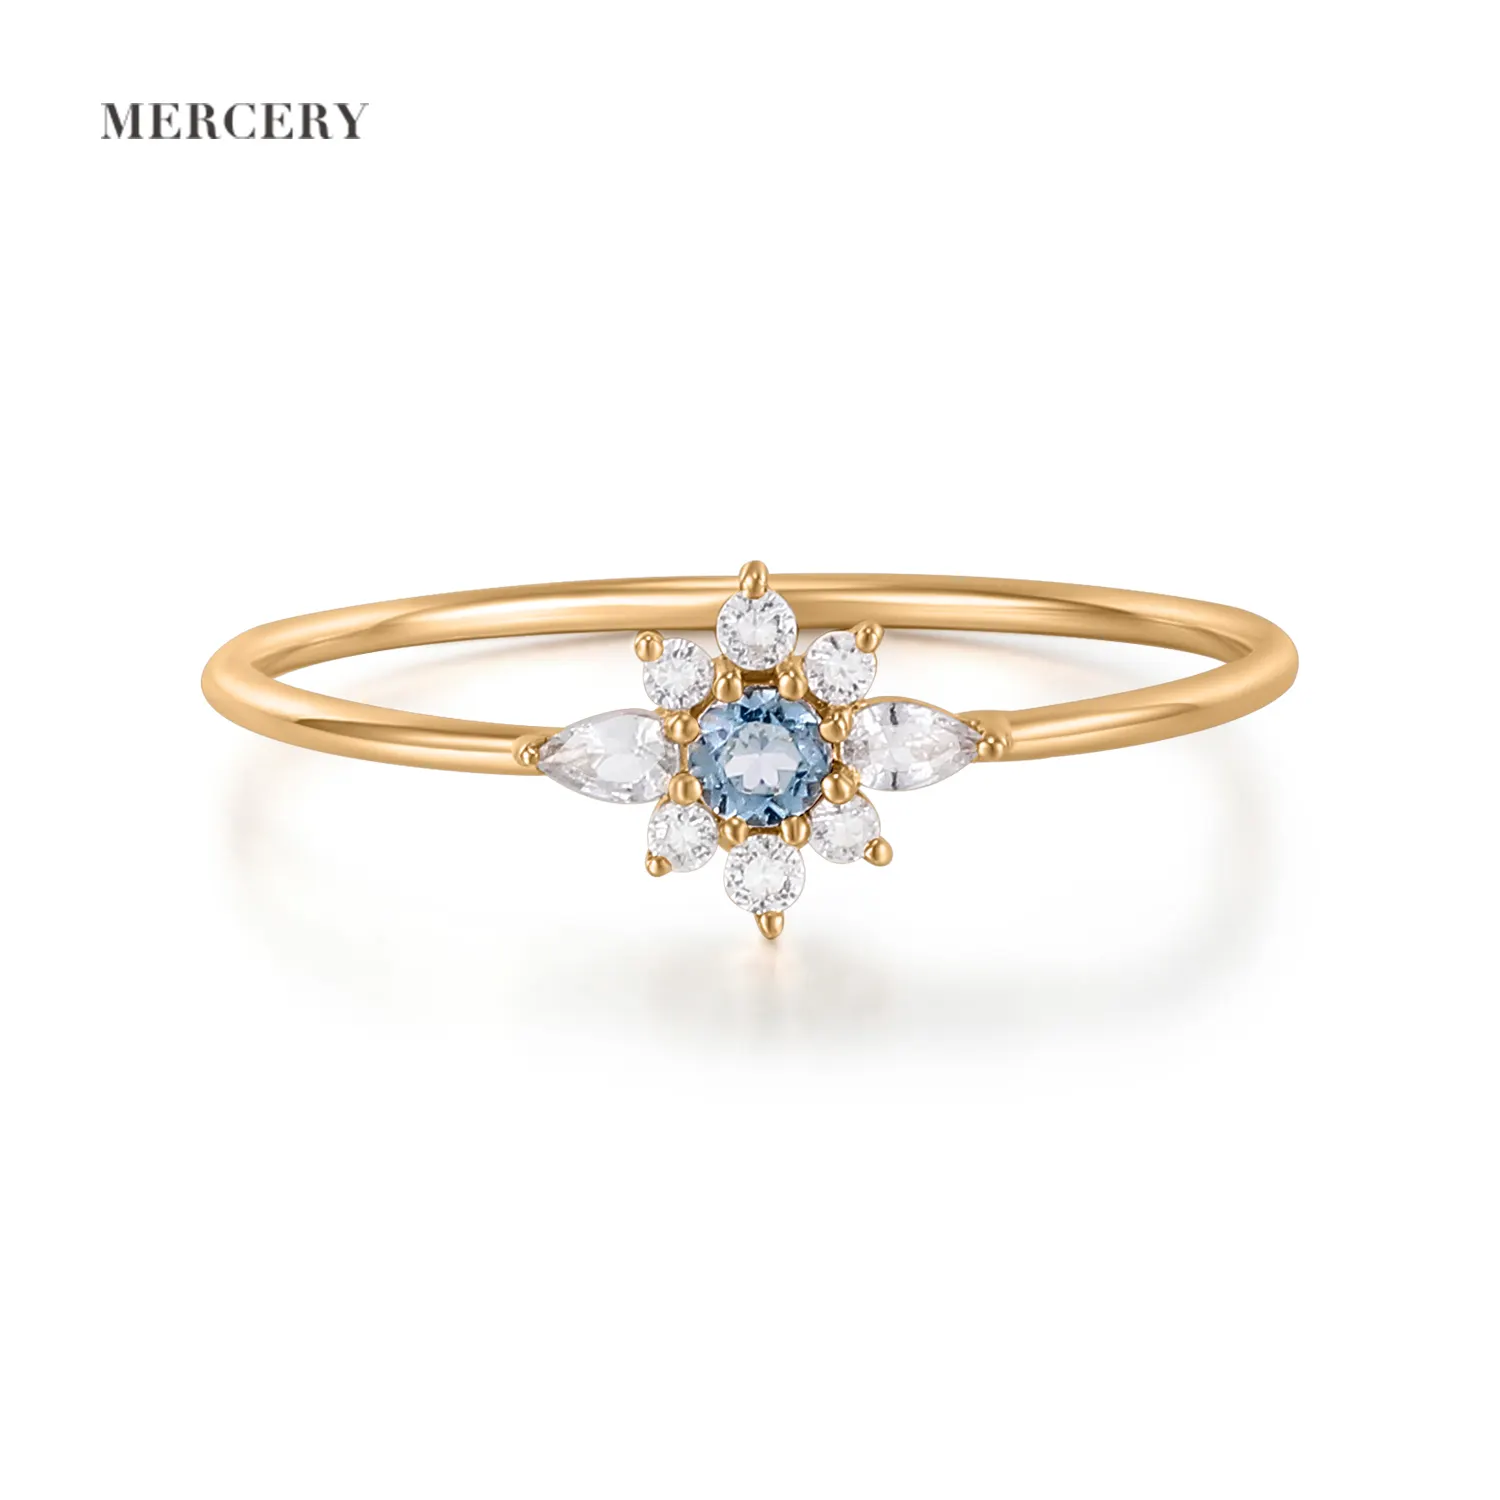 Mercery Jewelry 2022 Fashion Trend Jewelry Beautifully Designed High Quality 14K Solid Gold Gemstone Rings For Women